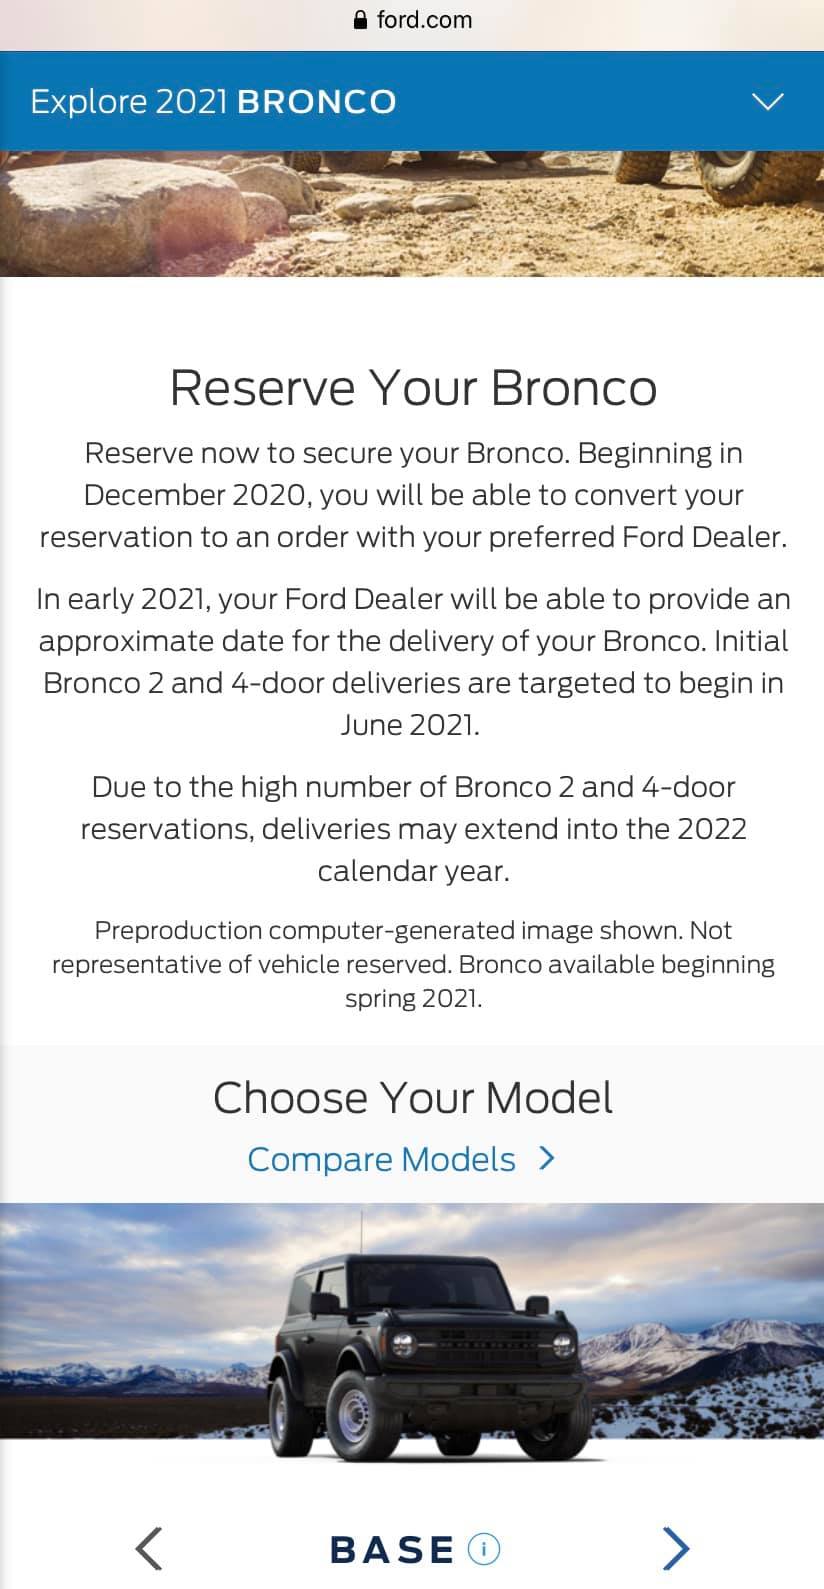 Ford Bronco 2021 Bronco delivery now "targeted to begin June 2021" and possibly into 2022 112775065_4092719534132316_4029297312504073054_o